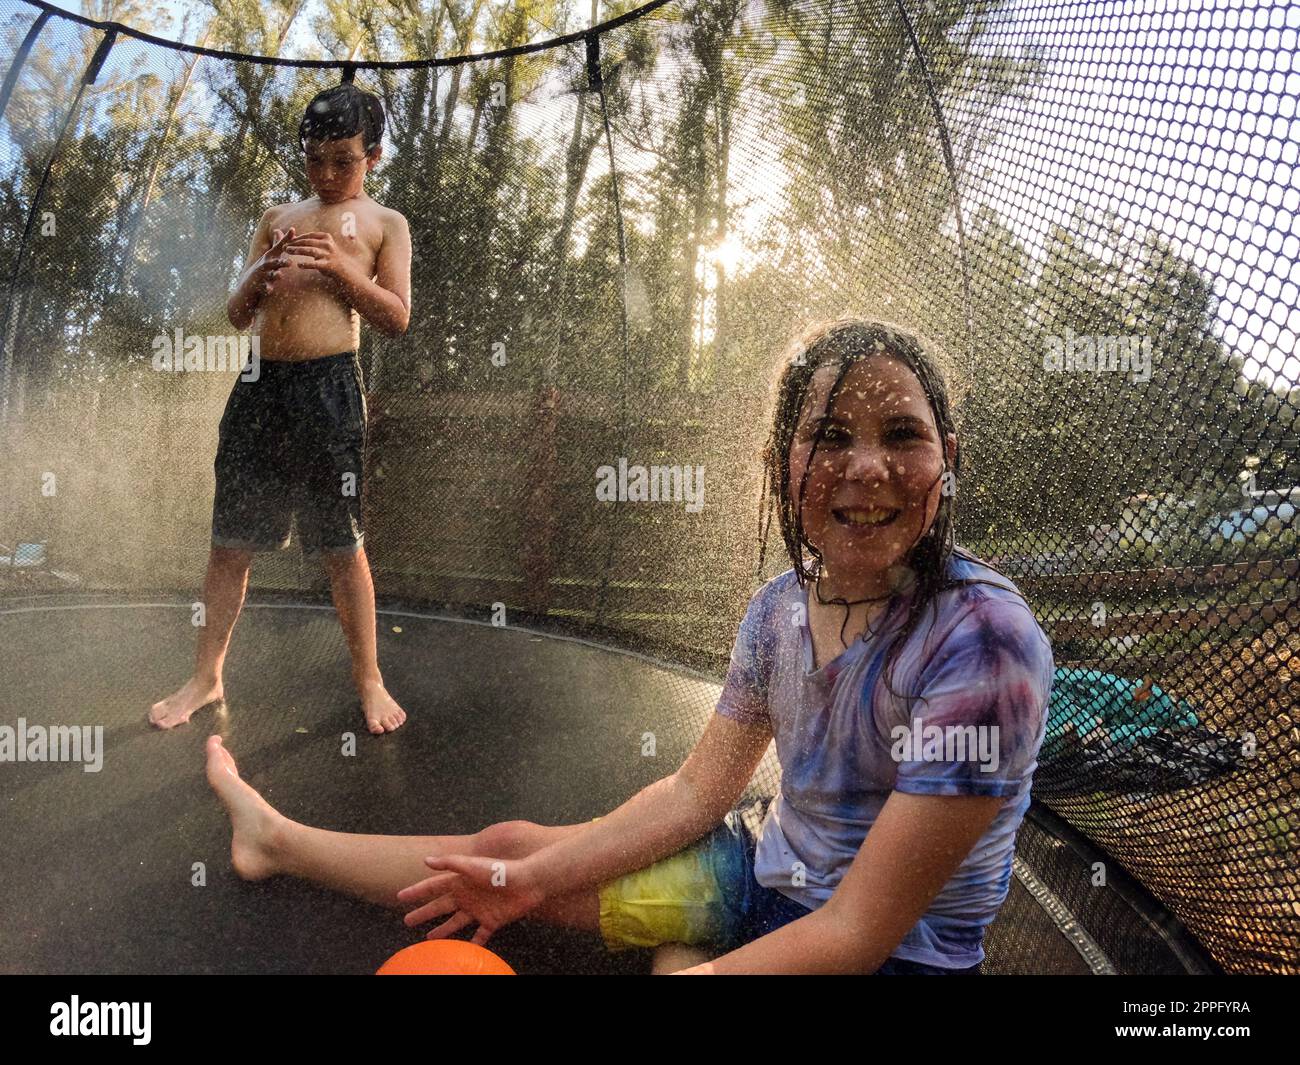 Smiling child on trampoline with brother in background and water spray Stock Photo